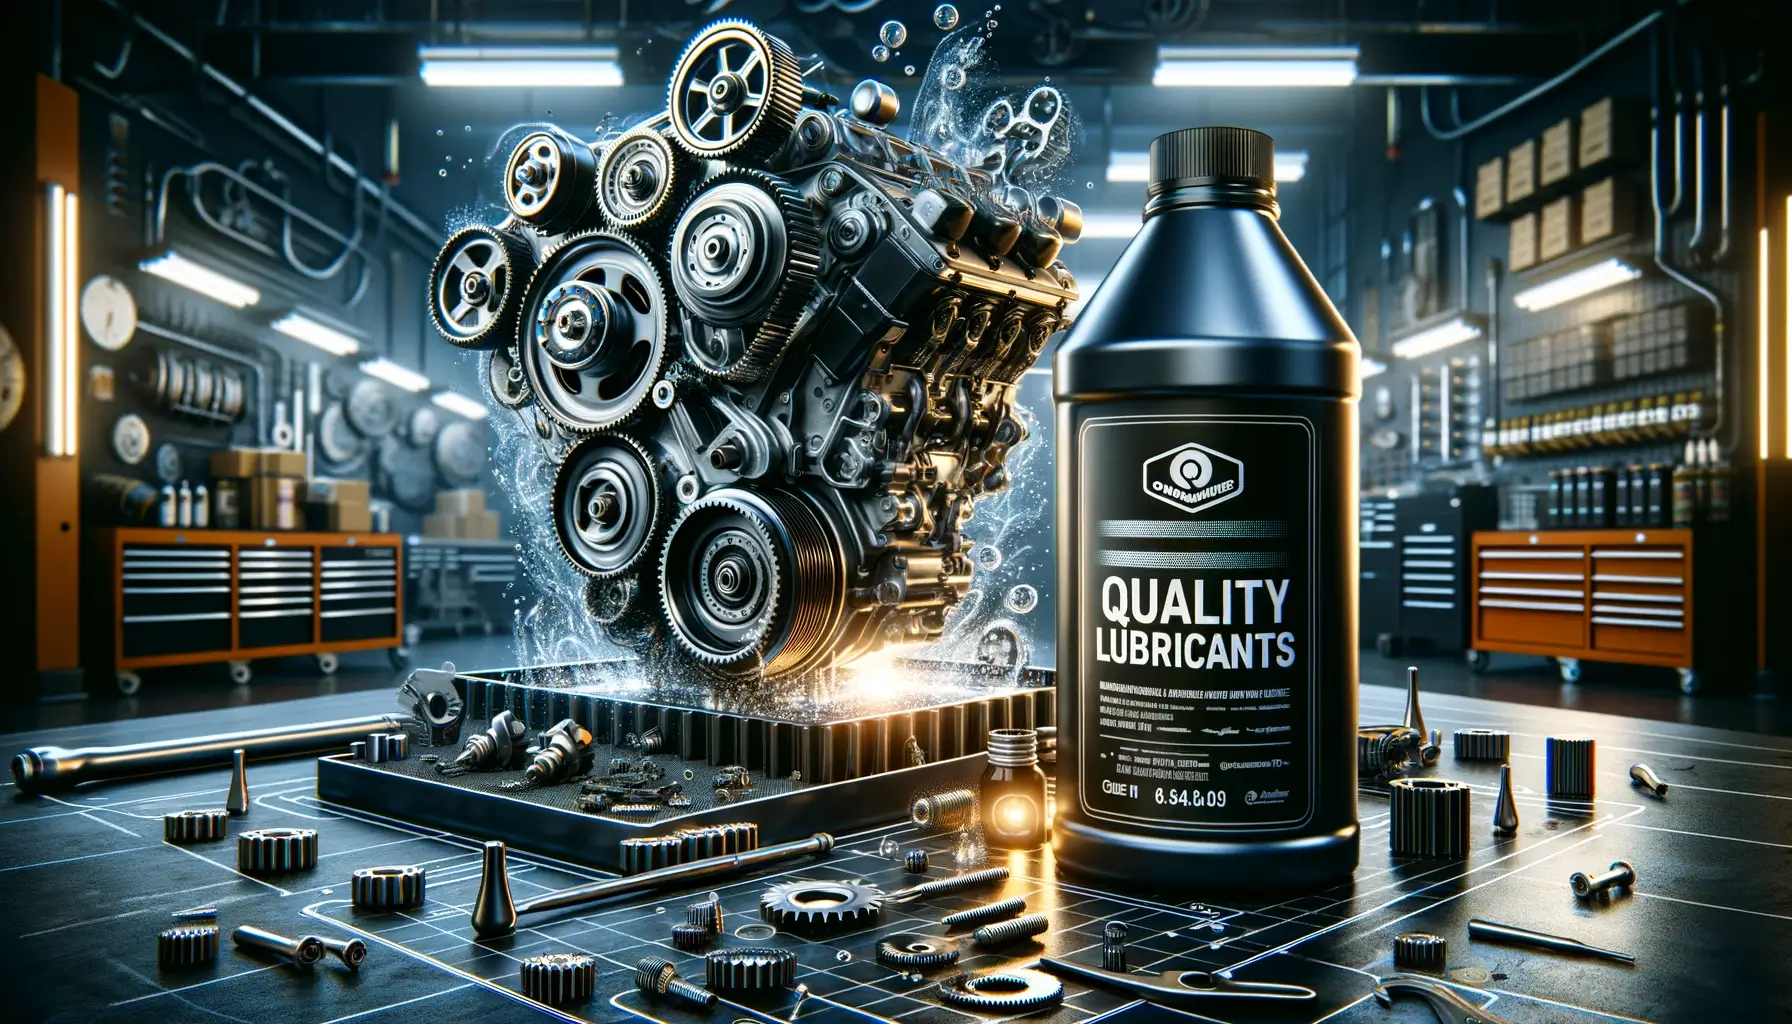 An-image-emphasizing-the-importance-of-quality-lubricants-for-engine-longevity